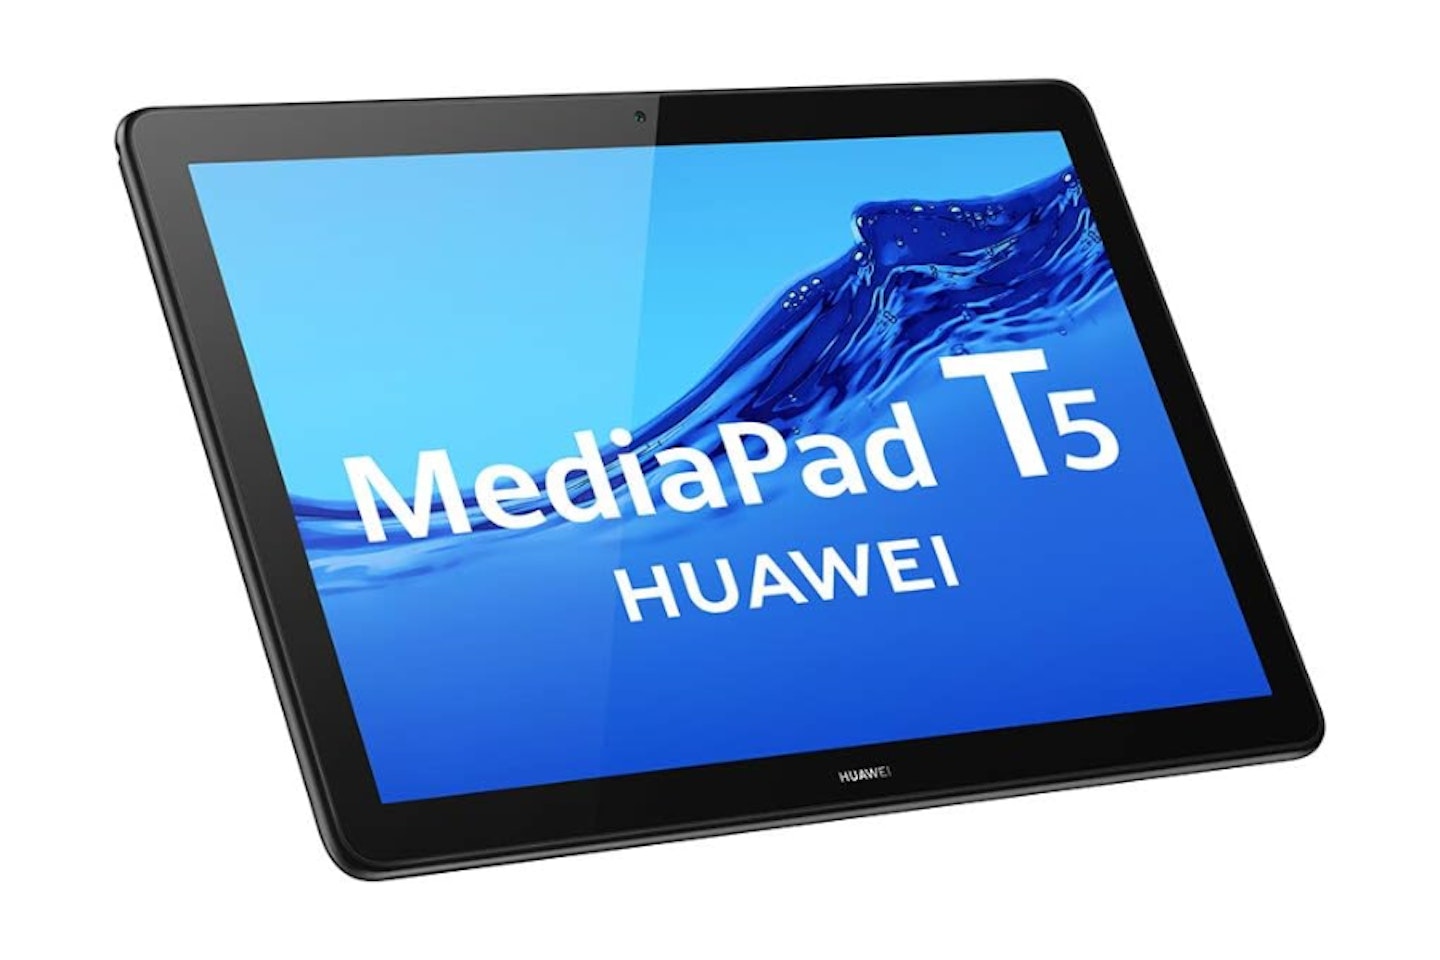 HUAWEI MediaPad T5 10.1 Inch 32GB - one of the best mini tablets